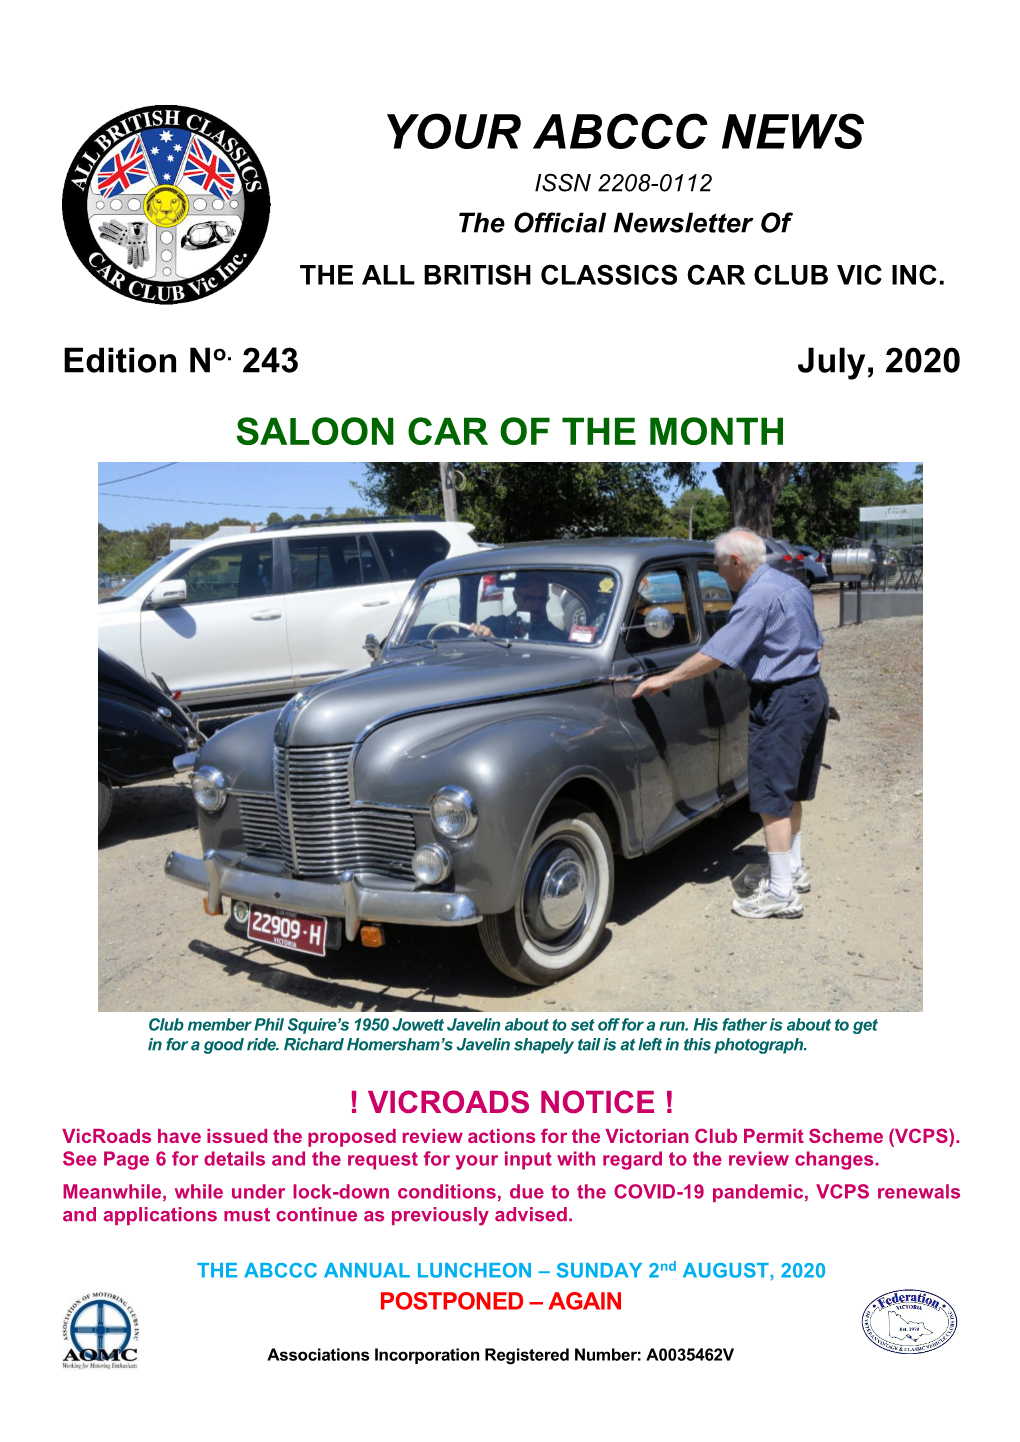 The Official Newsletter of the All British Classics Car Club (VIC)